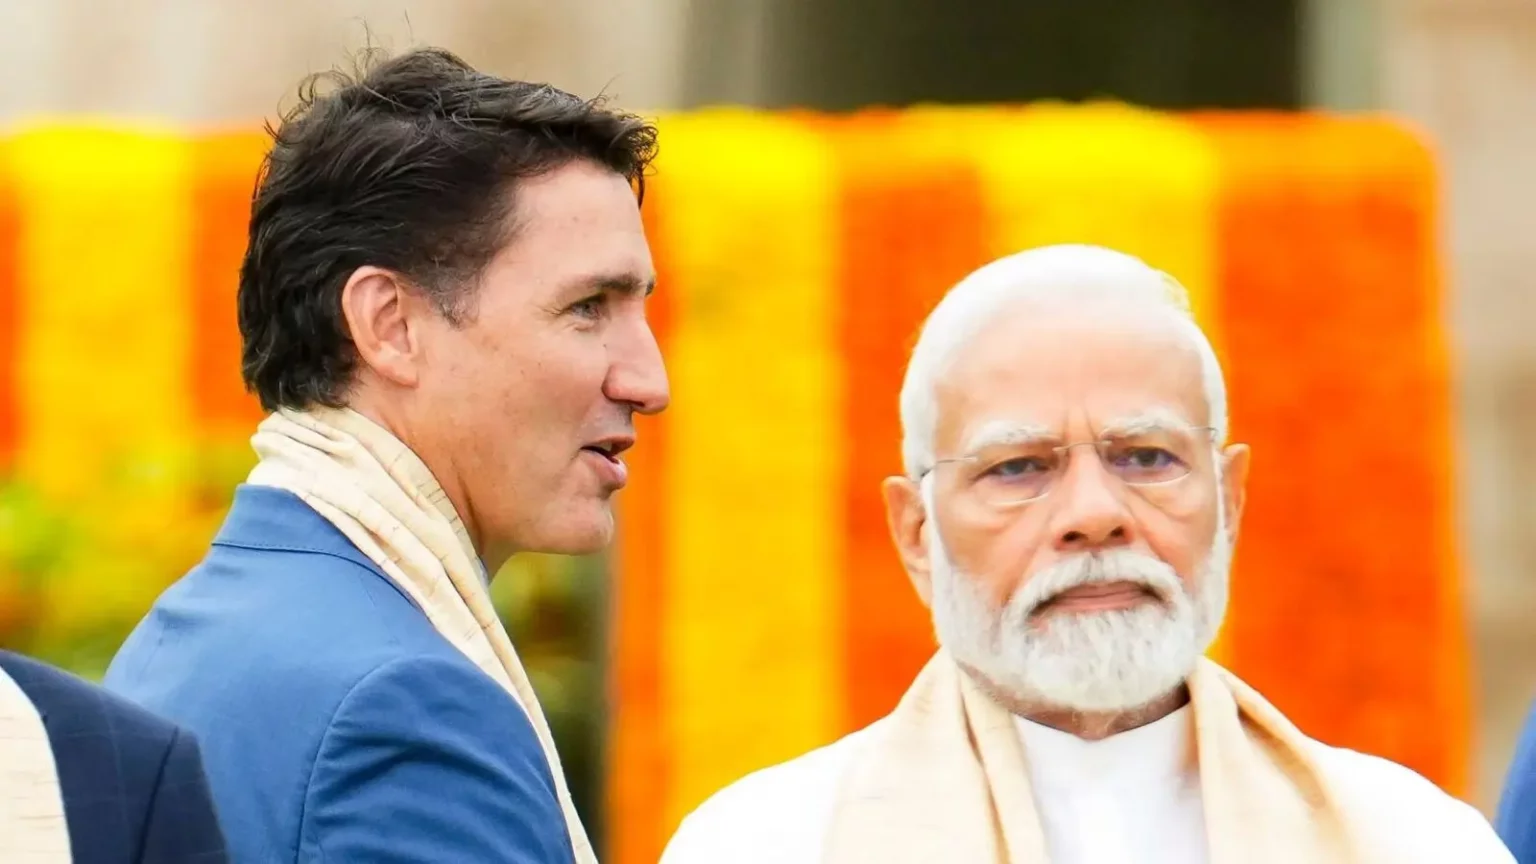 india-ordered-canadian-diplomat-to-leave-the-country-in-5-days